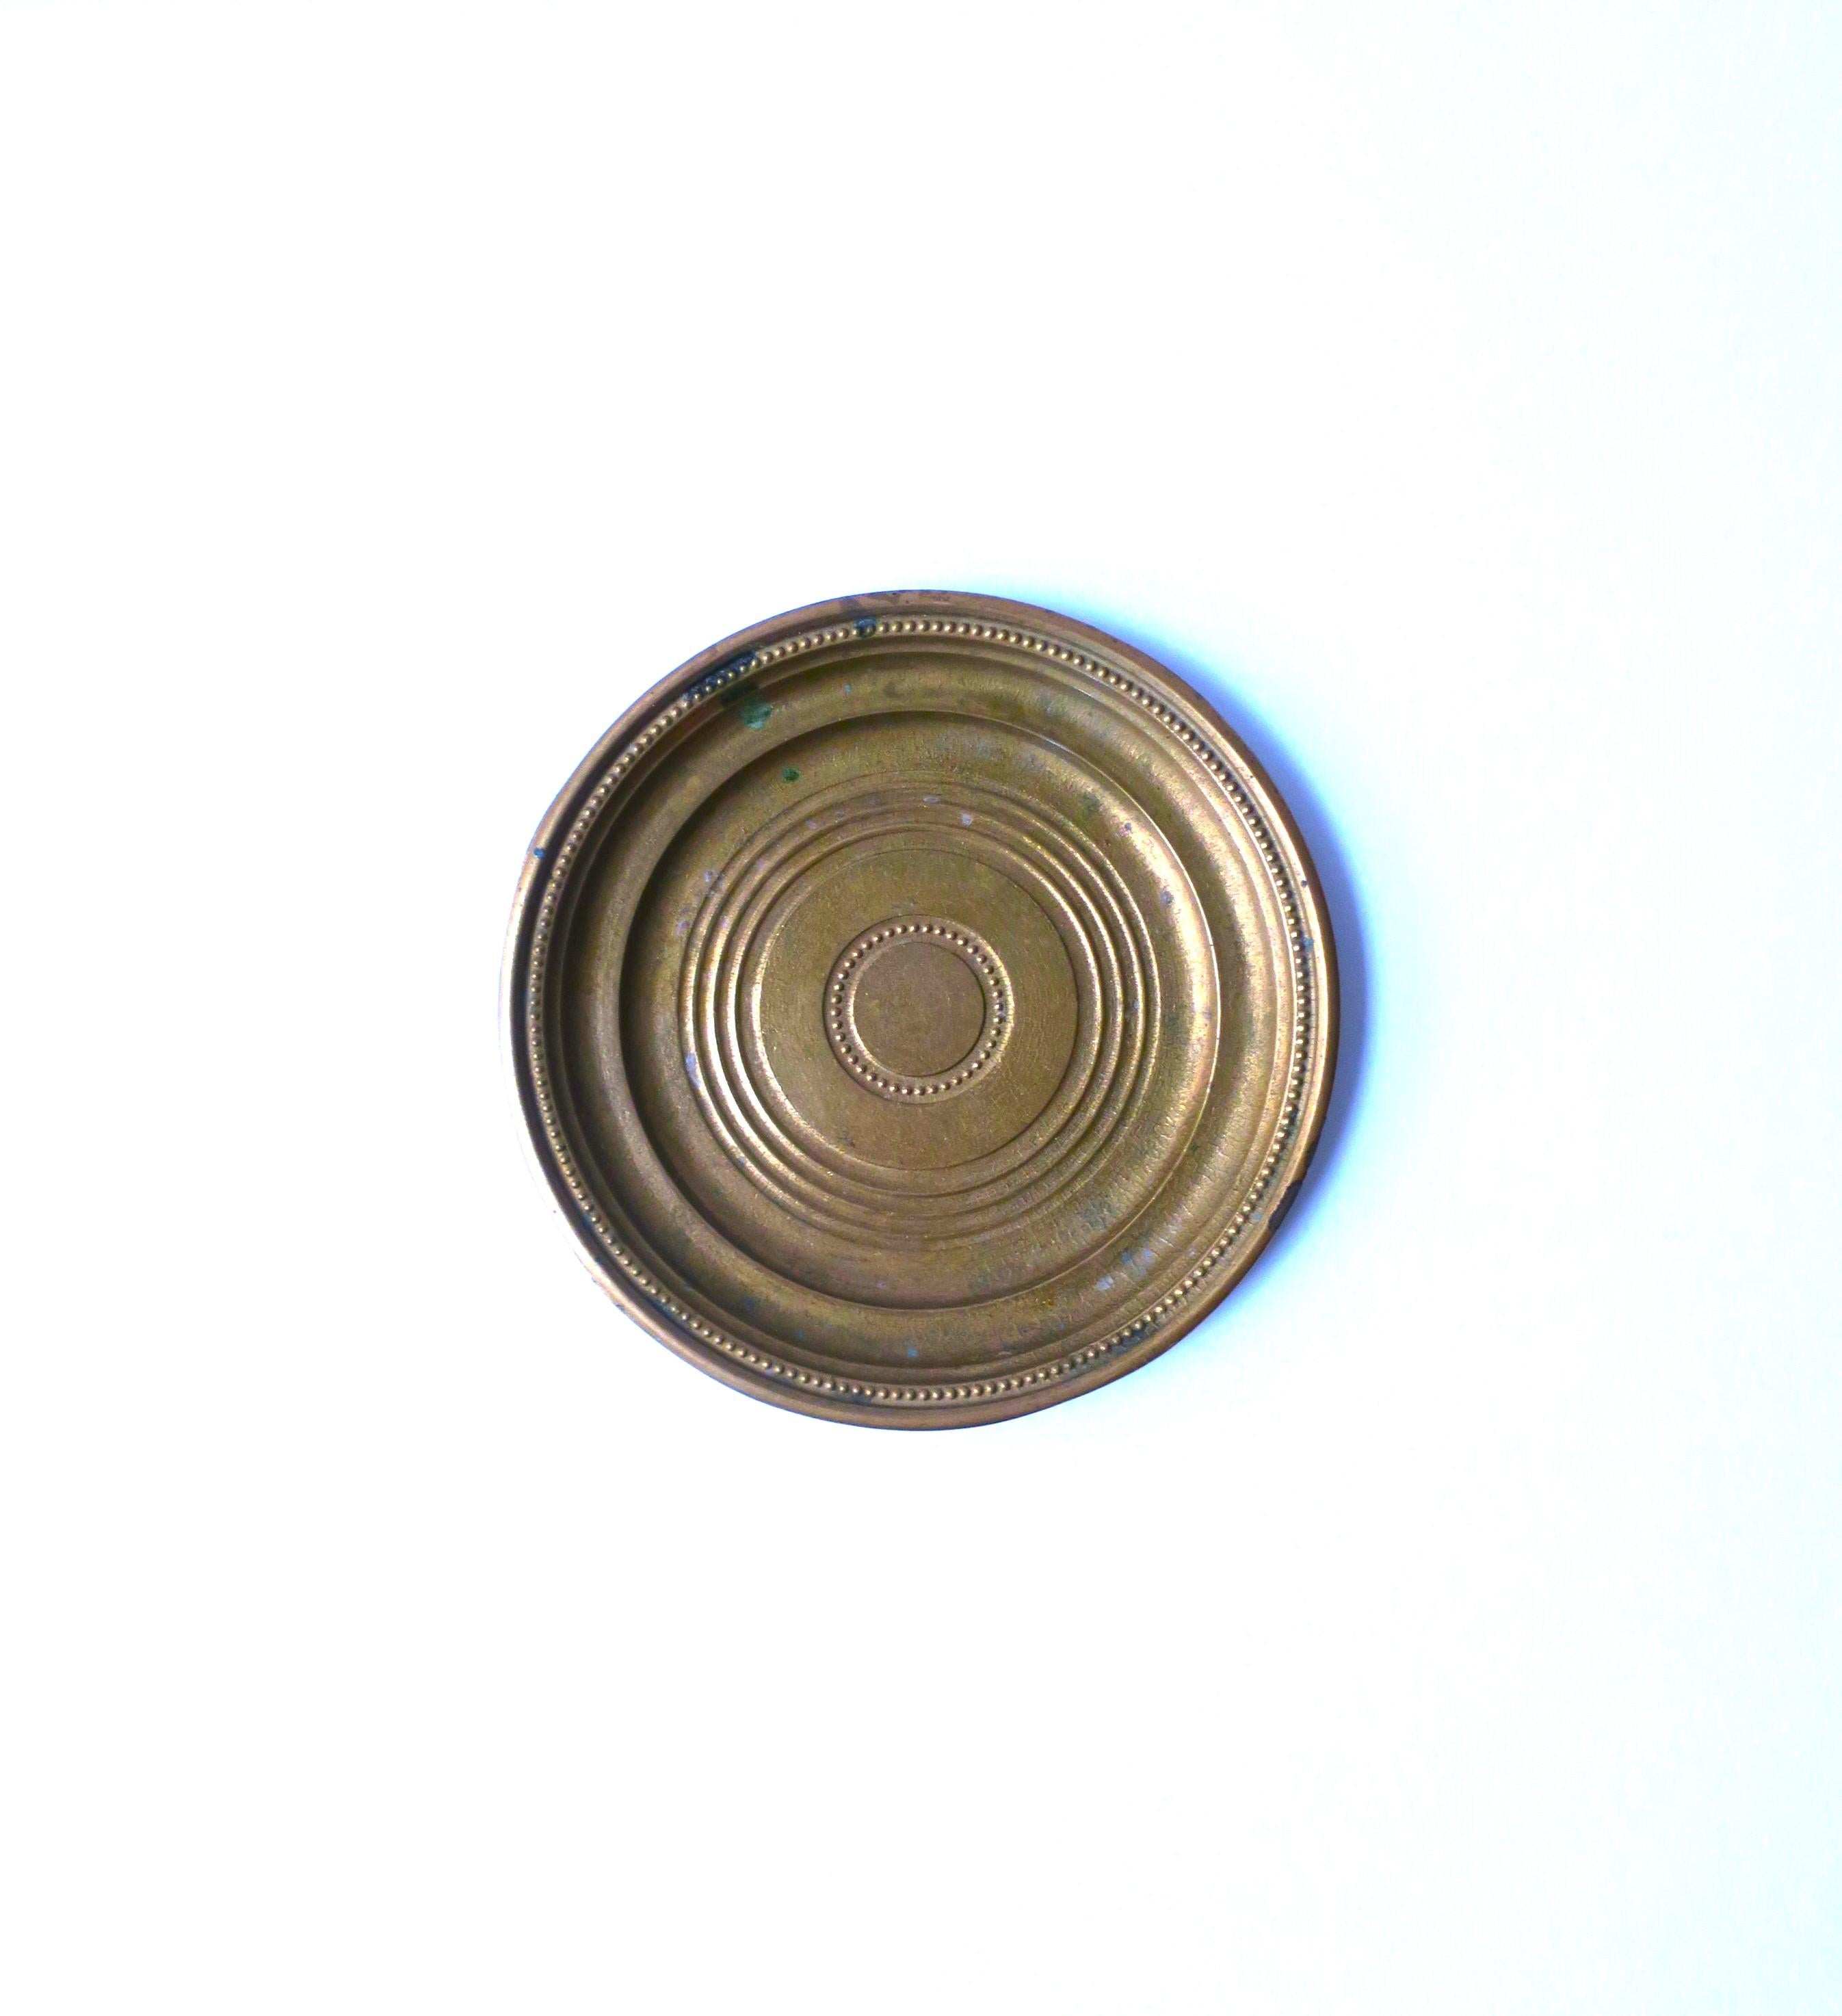 An Italian solid brass catchall vide-poche dish with bead or tiny ball design at center and around edge, circa early-20th century, Italy. A great piece for a desk, vanity, nightstand table, etc., to hold small items such as coin change, paperclips,